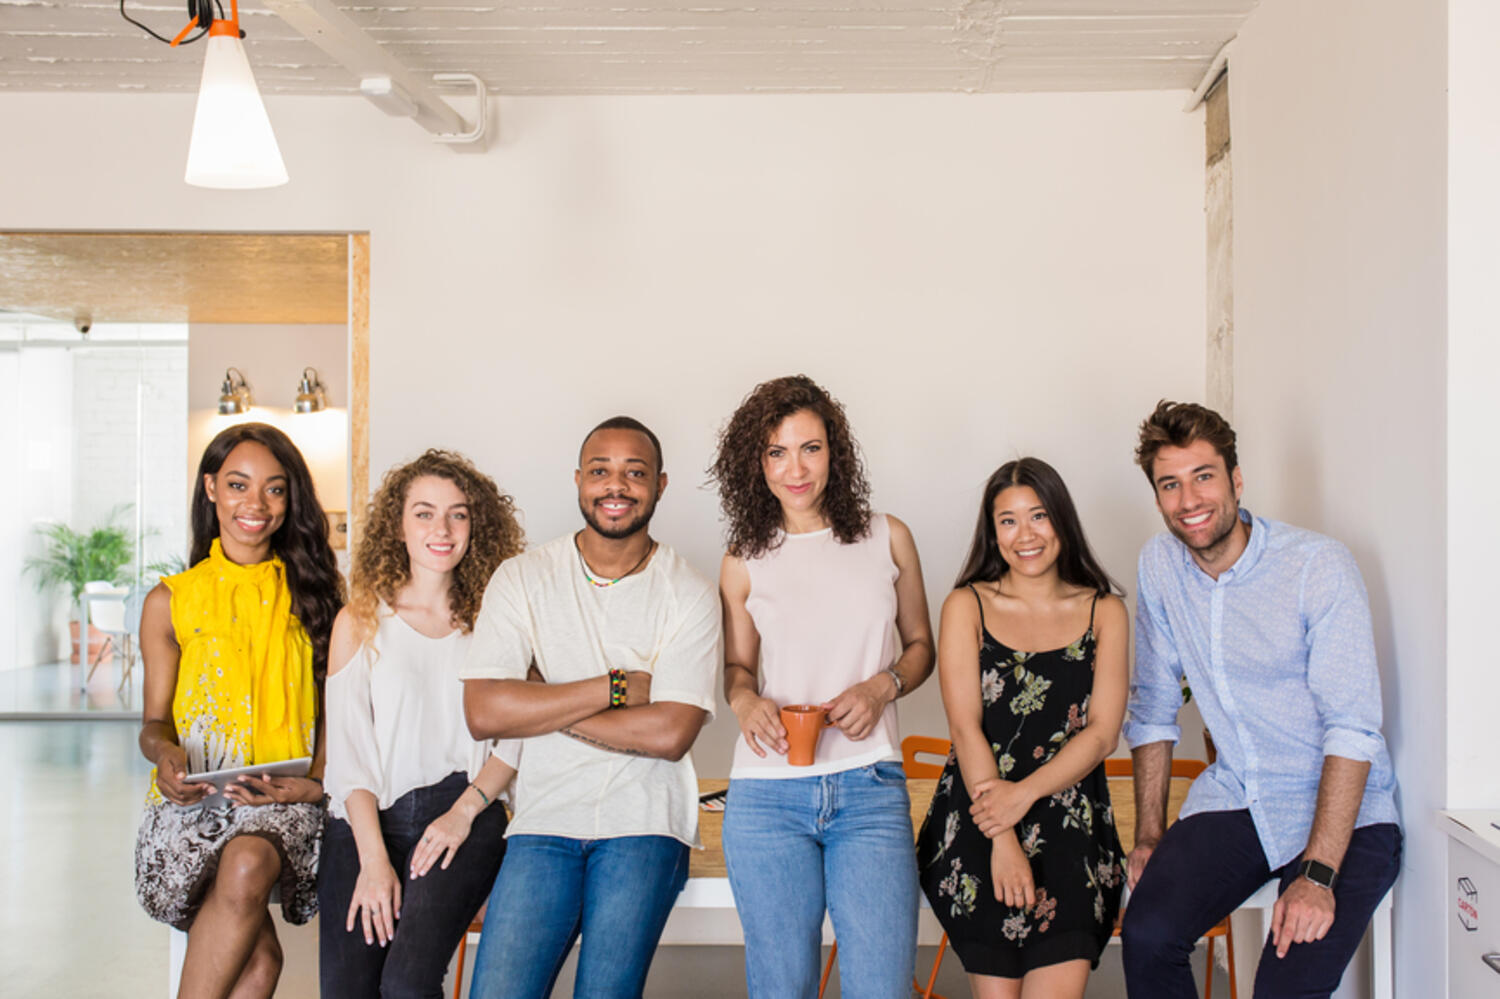 5 Tips to Make Better Workplaces for Millennials